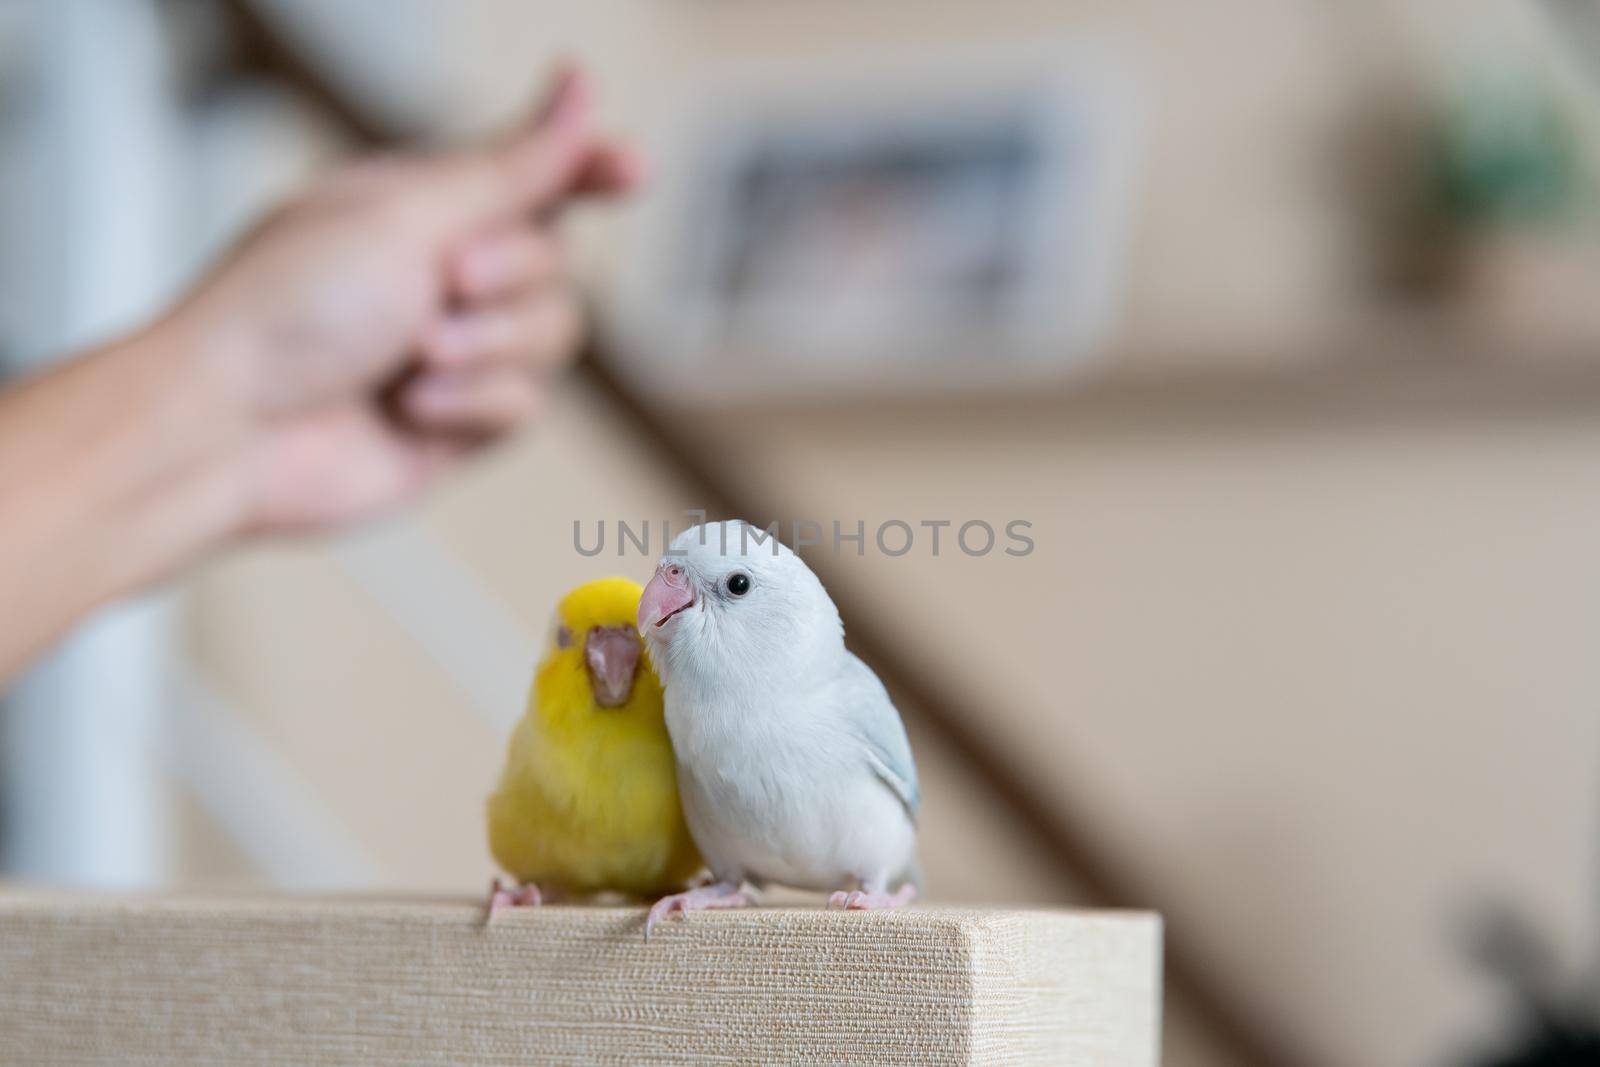 Tiny parrot yellow and white Forpus bird wiht hand. by sirawit99